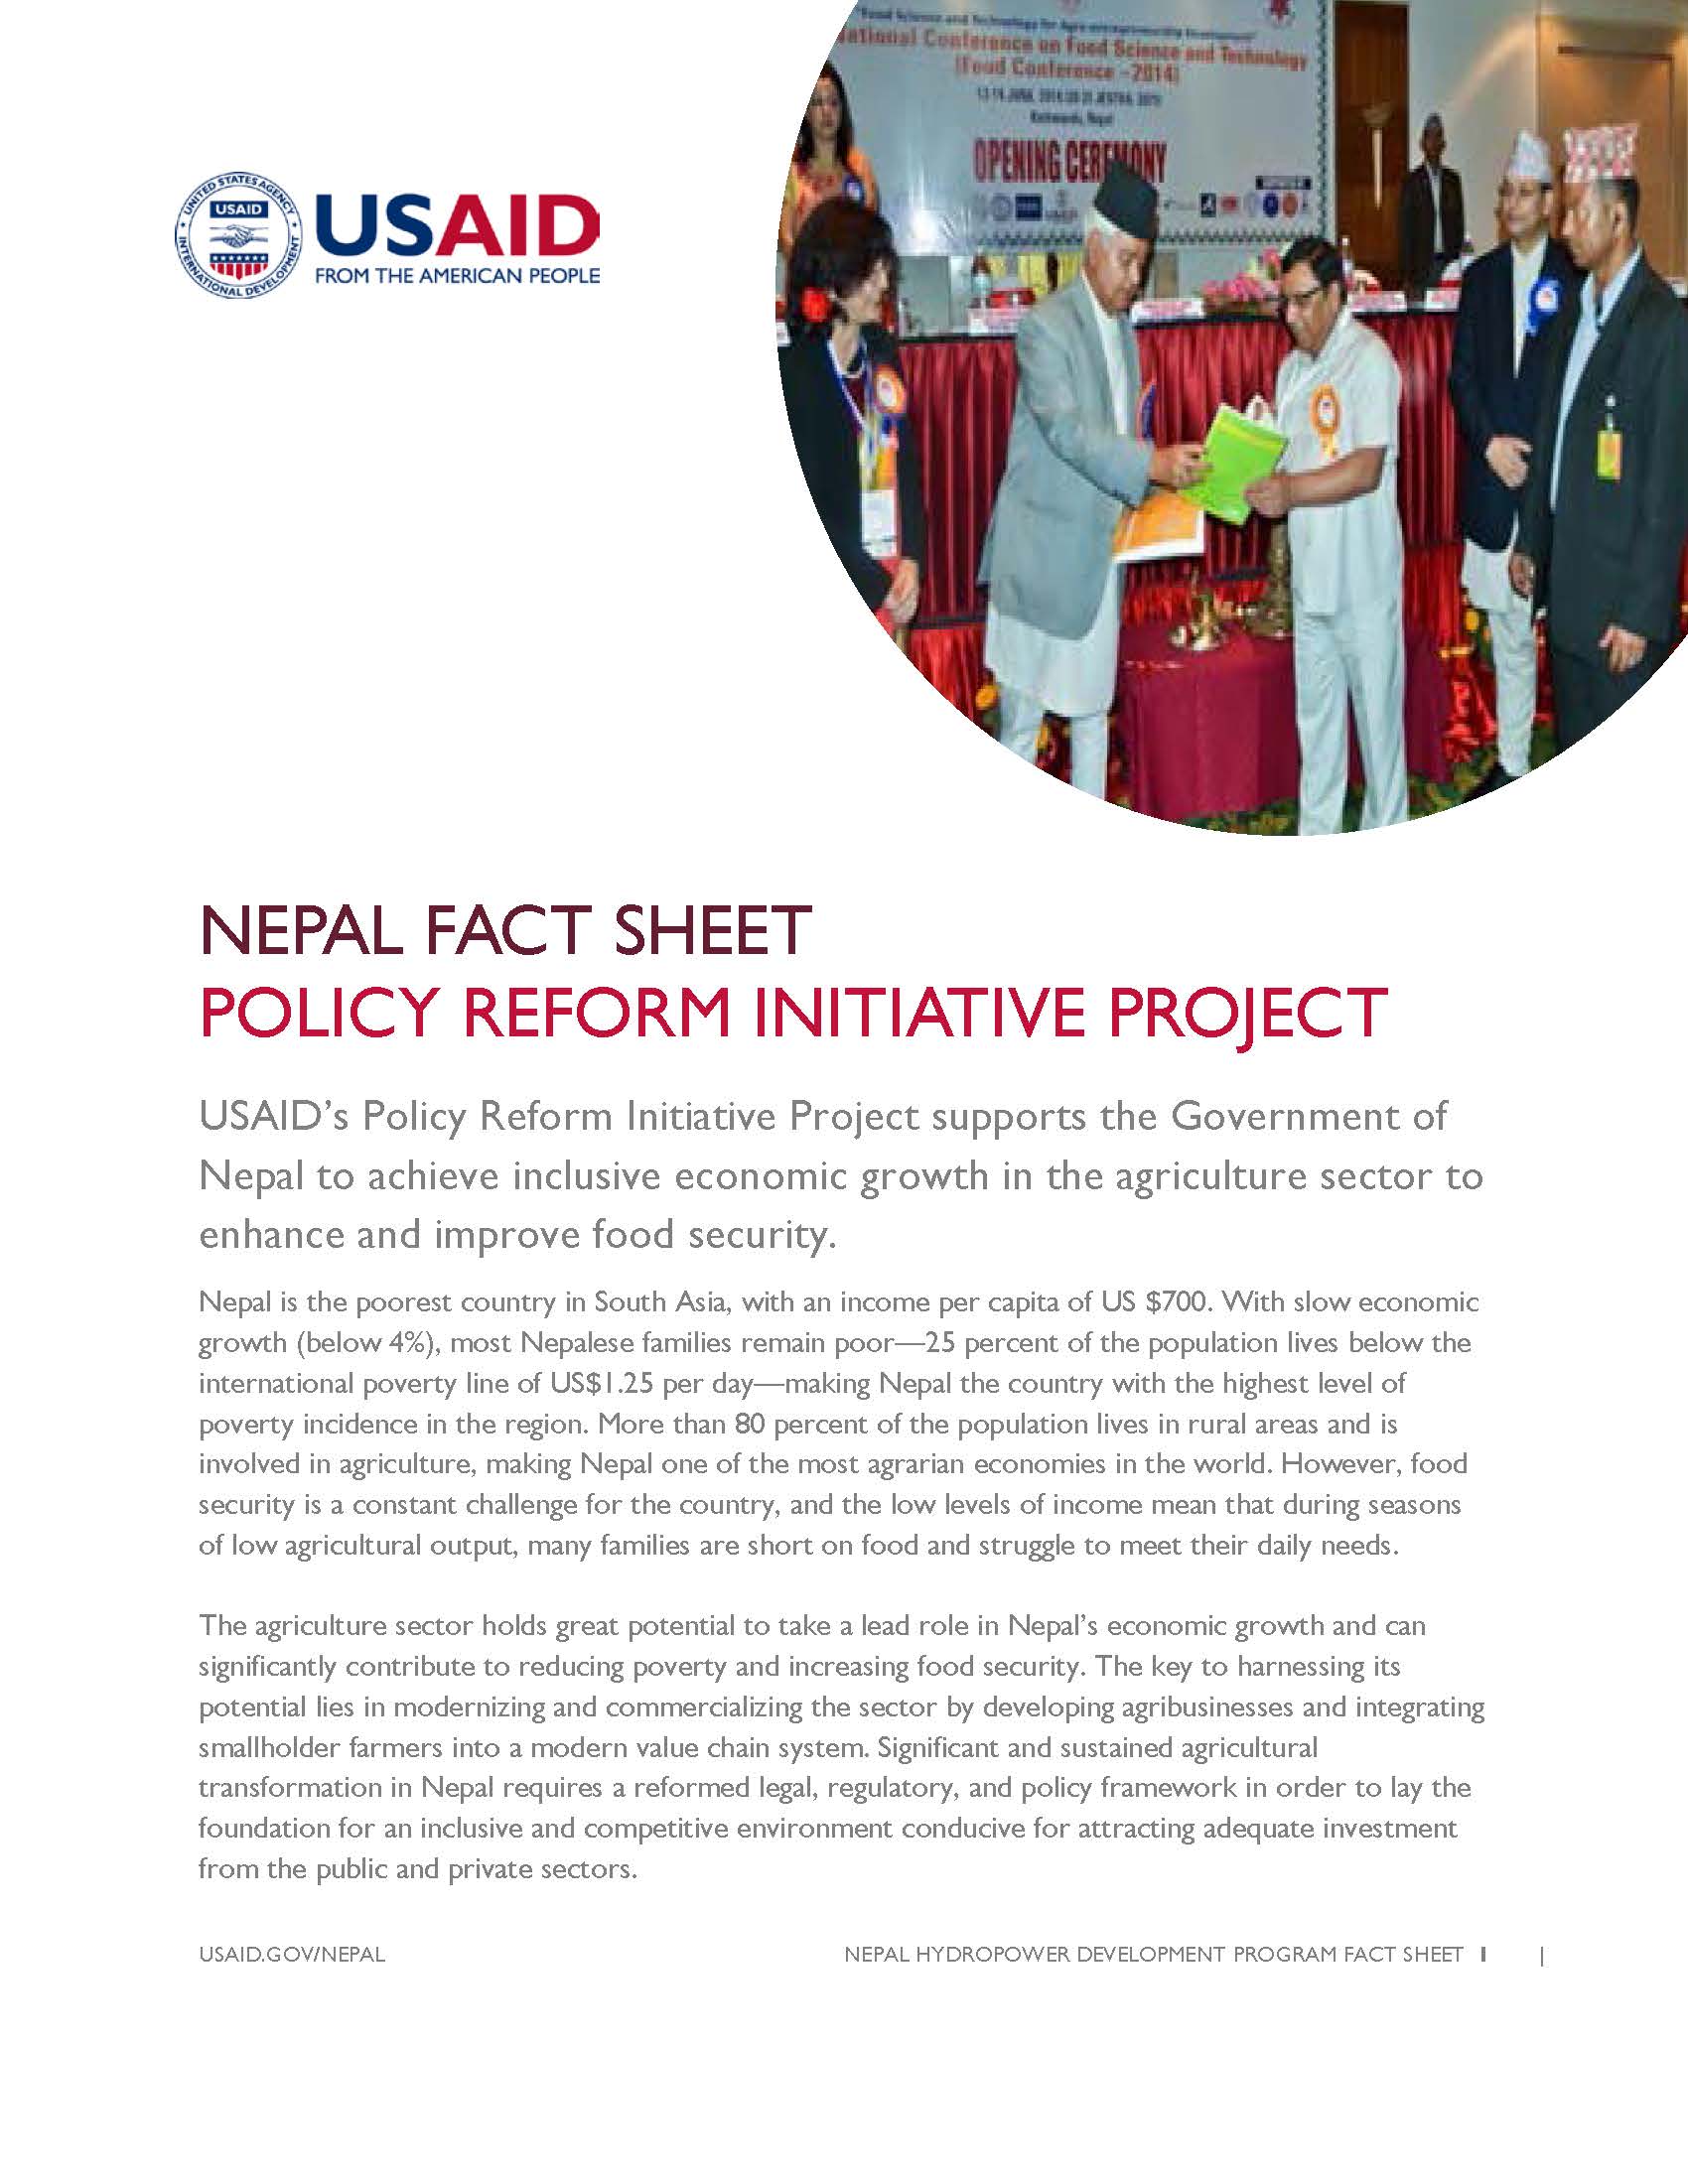 FACT SHEET: POLICY REFORM INITIATIVE (PRI) PROJECT